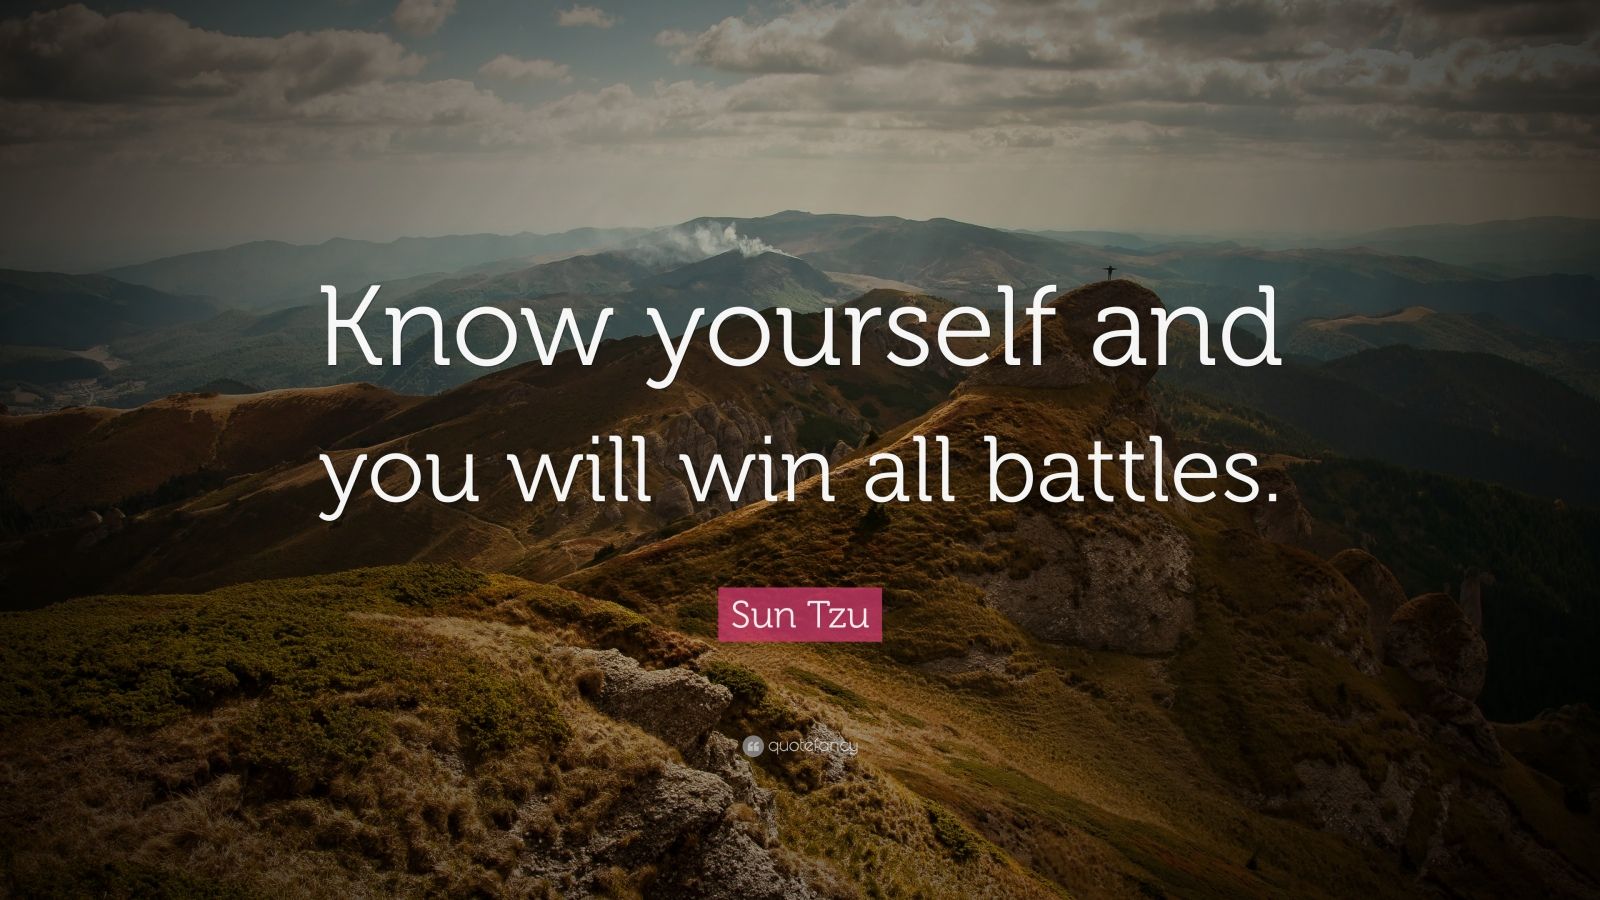 Sun Tzu Quote “Know yourself and you will win all battles